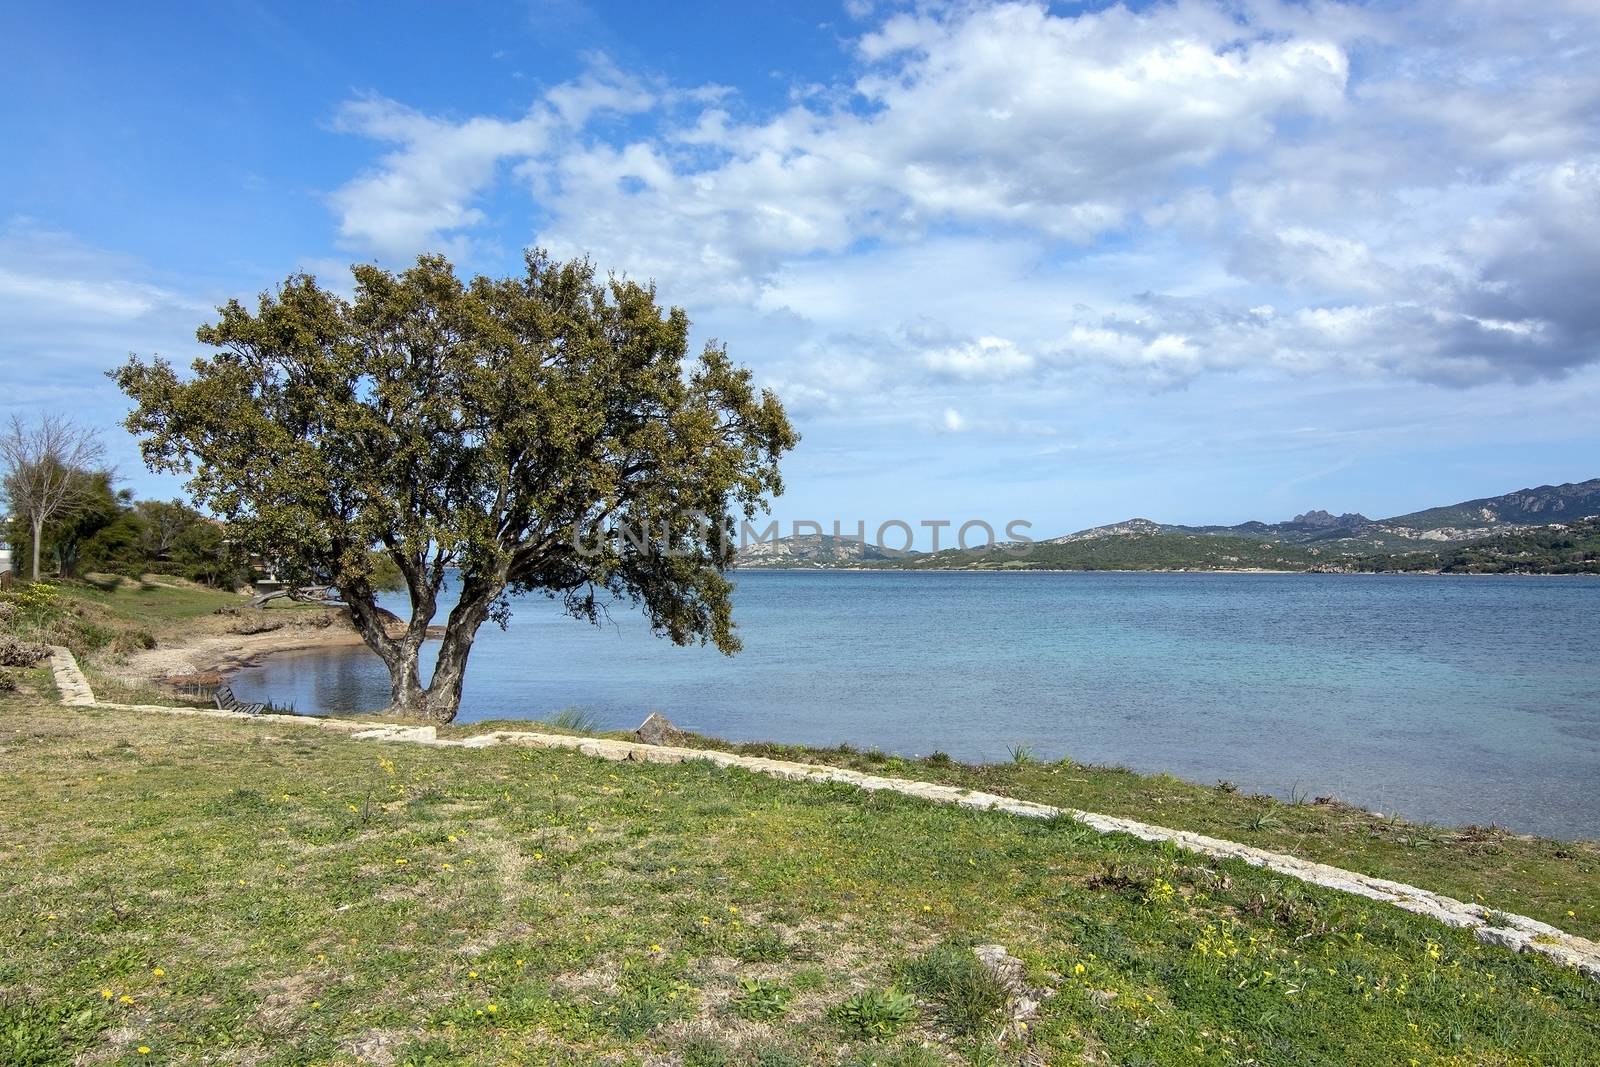 Landscape with tree and sandy beach in Sardinia, Italy, on an overcast day in March.